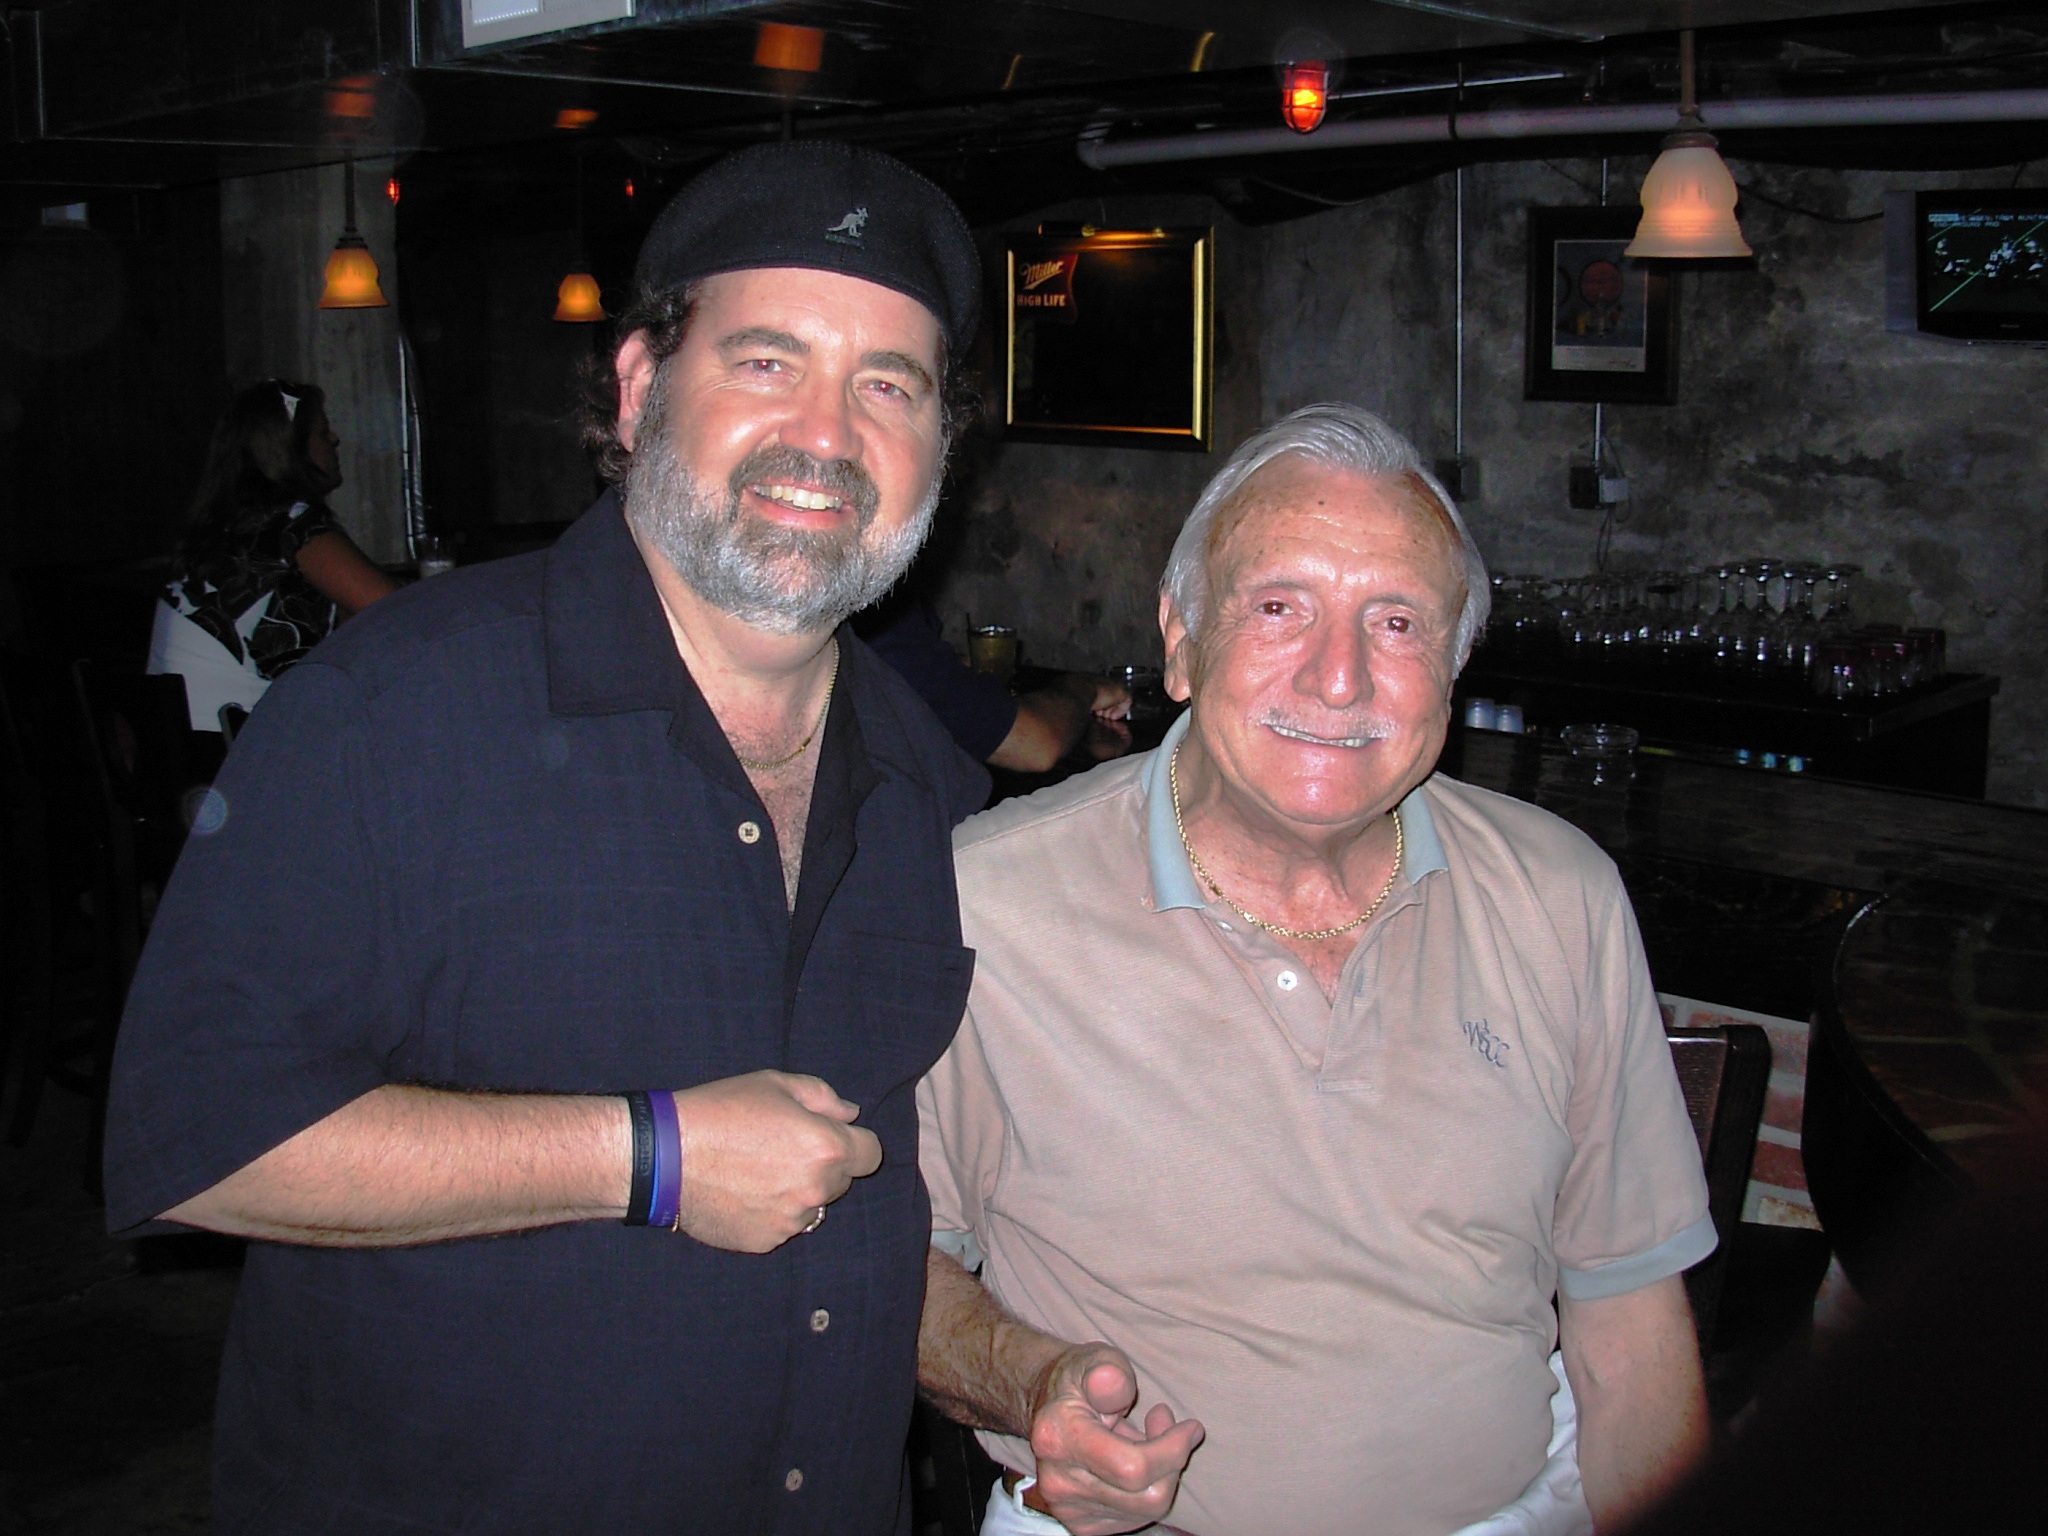 Jack Snavely, past president and board member of Friends of Jazz, with the Wise Guy
